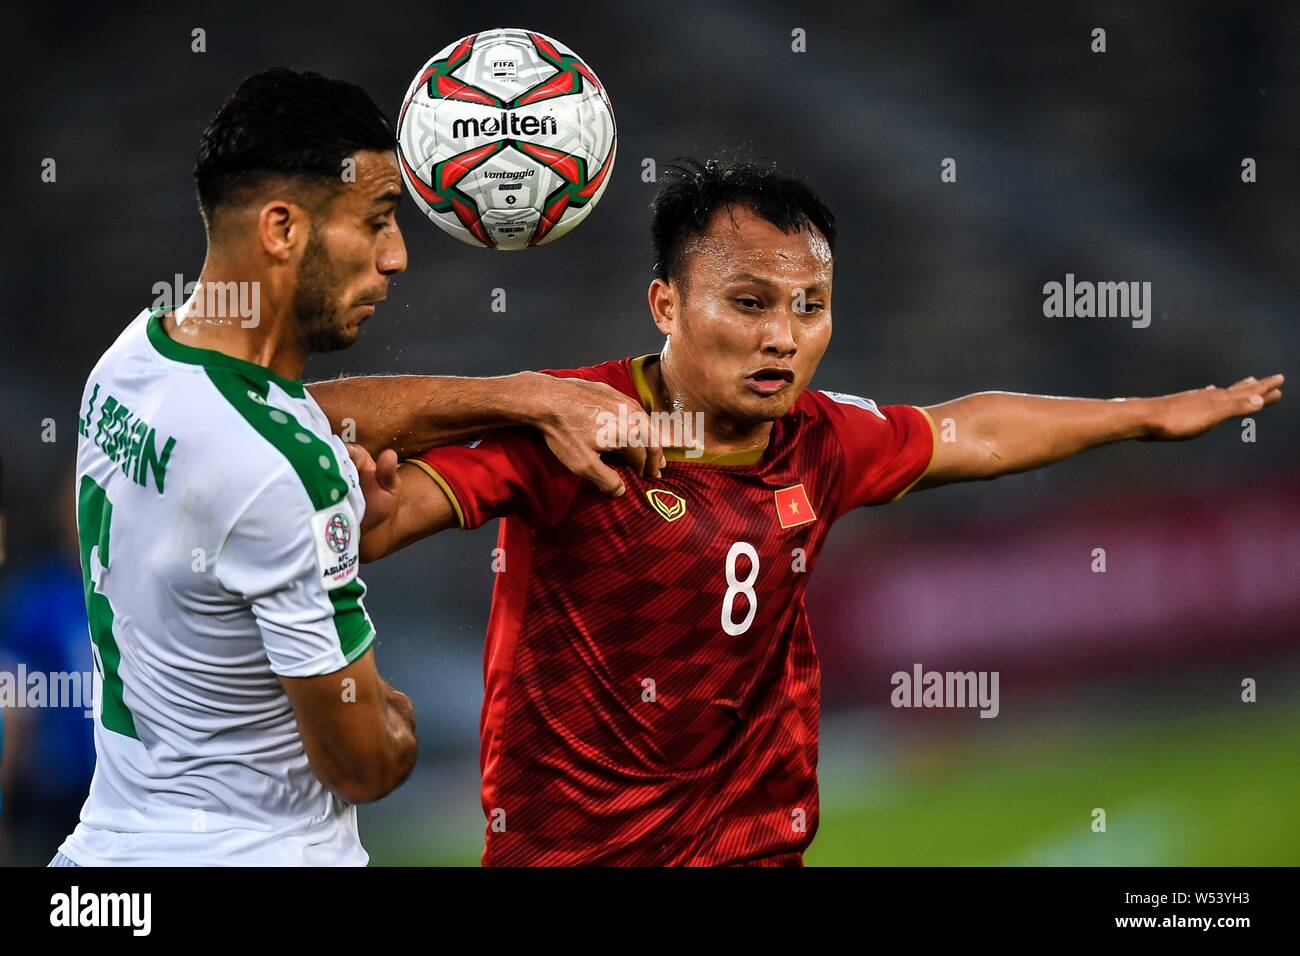 Ali Adnan, left, of Iraq national football team heads the ball against  Nguyen Trong Hoang of Vietnam national football team in the AFC Asian Cup  group Stock Photo - Alamy